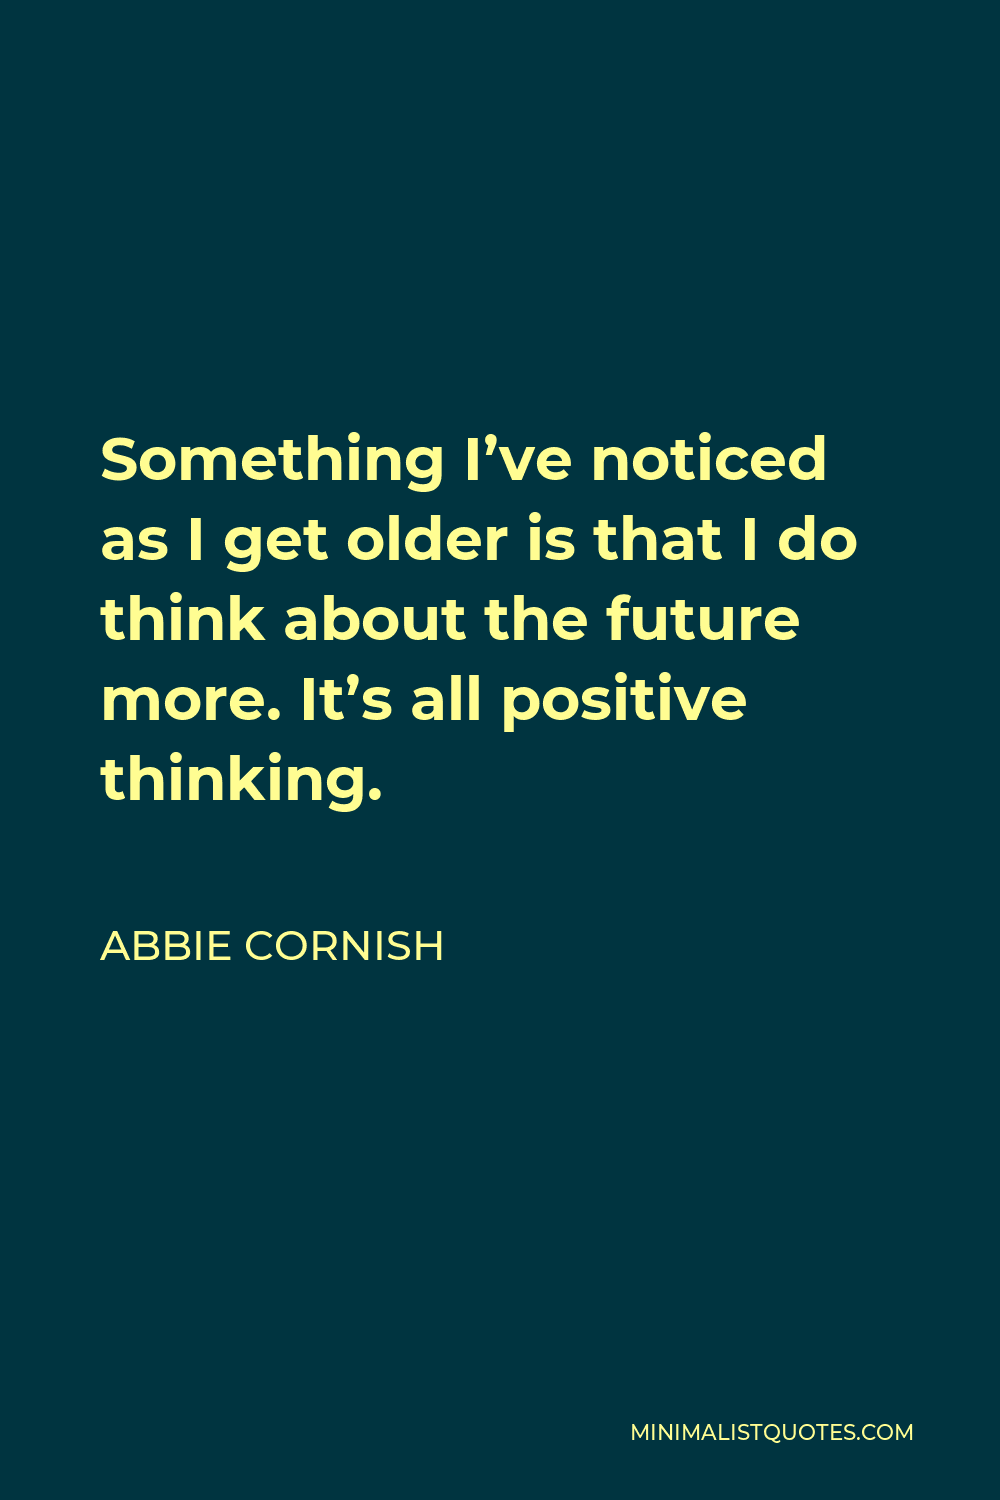 Abbie Cornish Quote - Something I’ve noticed as I get older is that I do think about the future more. It’s all positive thinking.